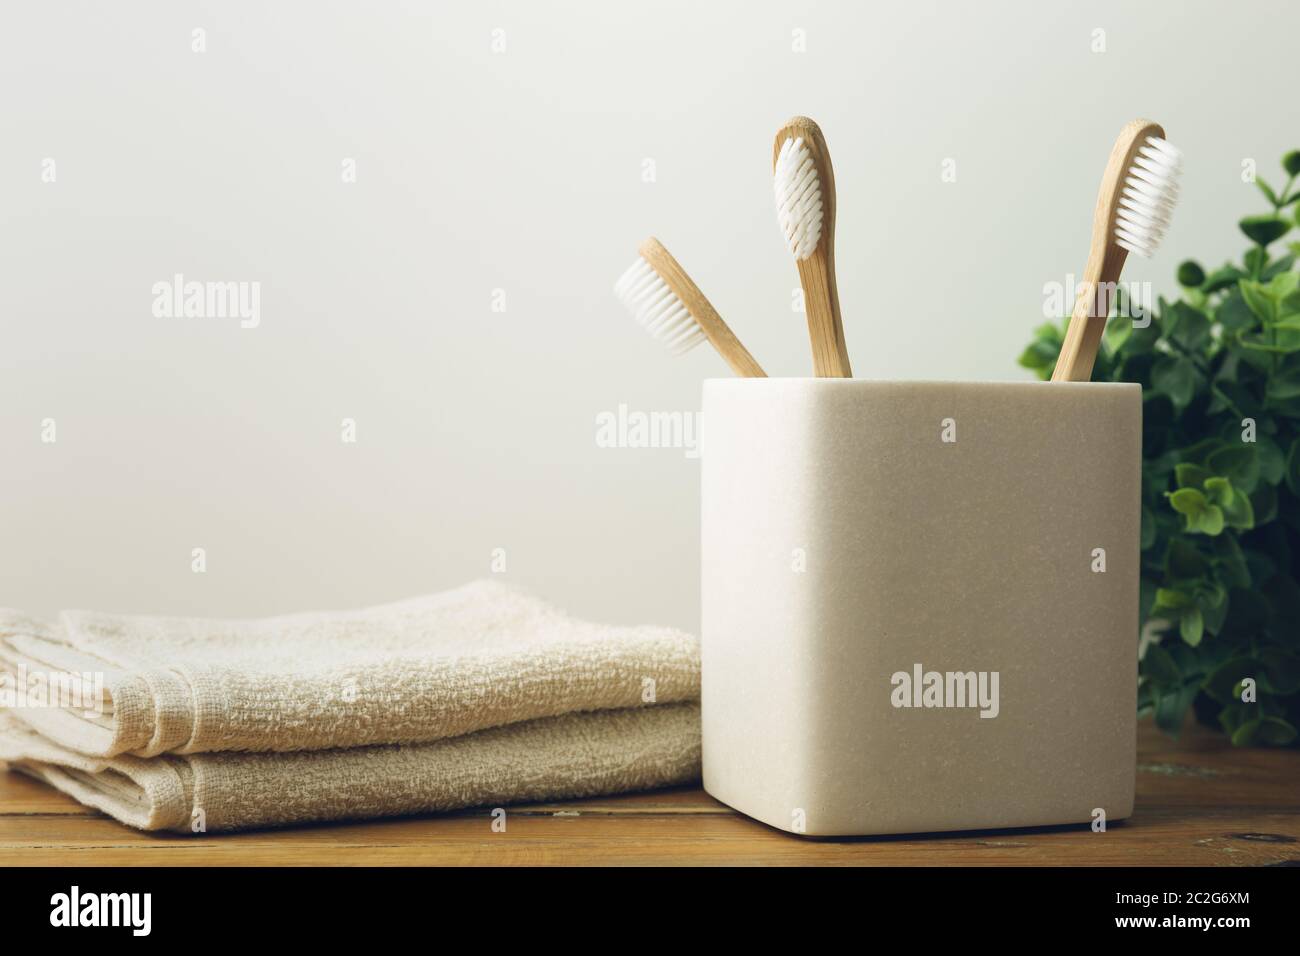 Three bamboo toothbrushes in a glass with plant and towerls an a background. Environmental awareness and oral care concept Stock Photo